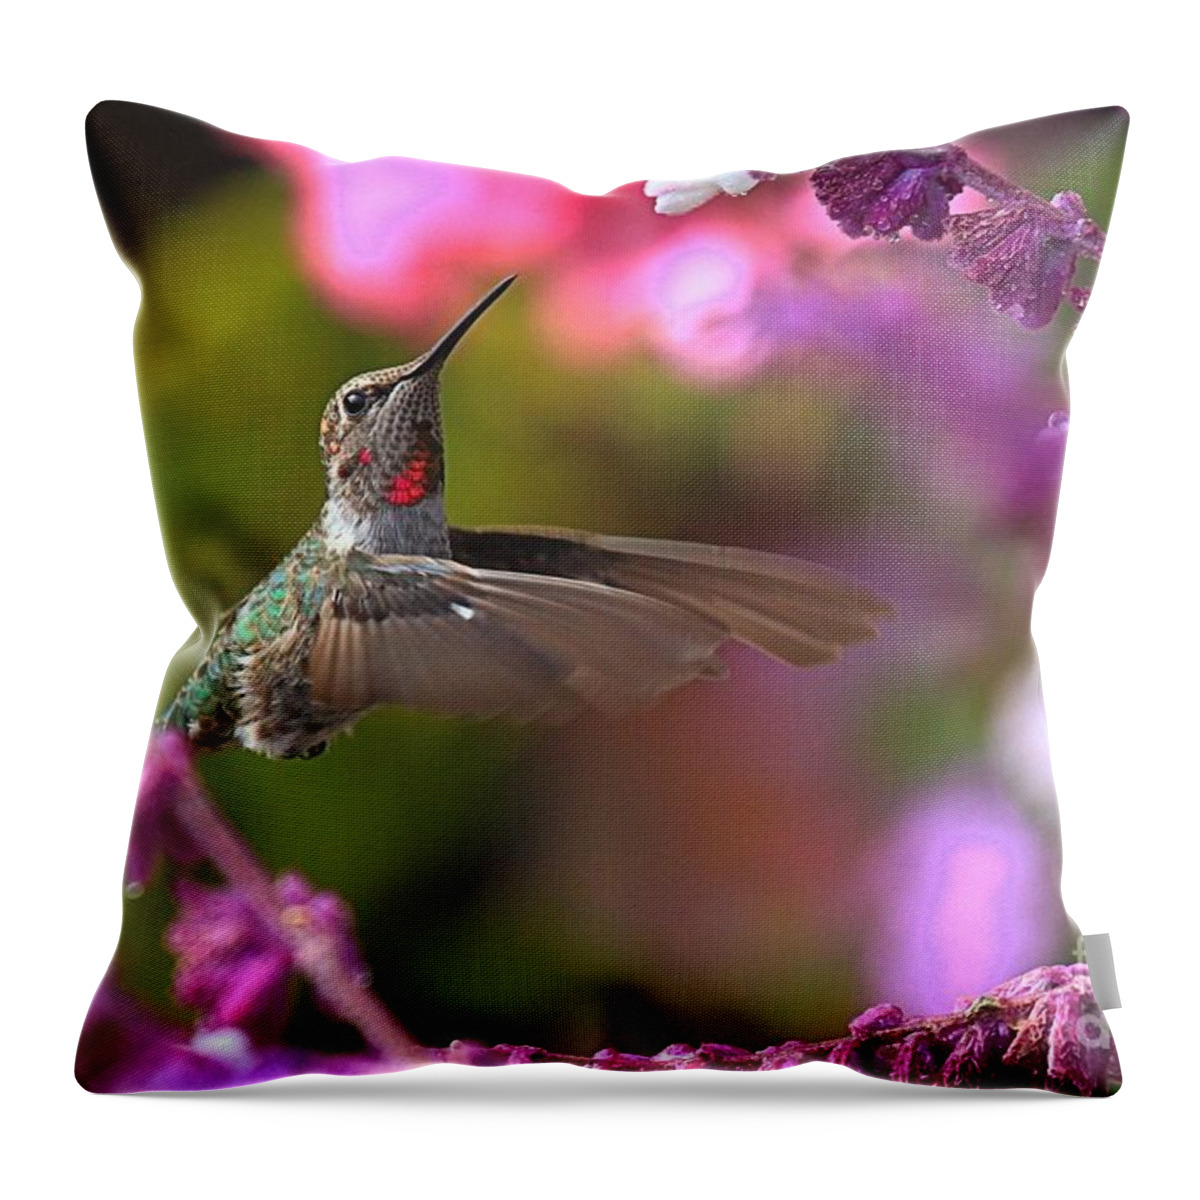 Hummingbird Throw Pillow featuring the photograph In Between Meals by Adam Jewell